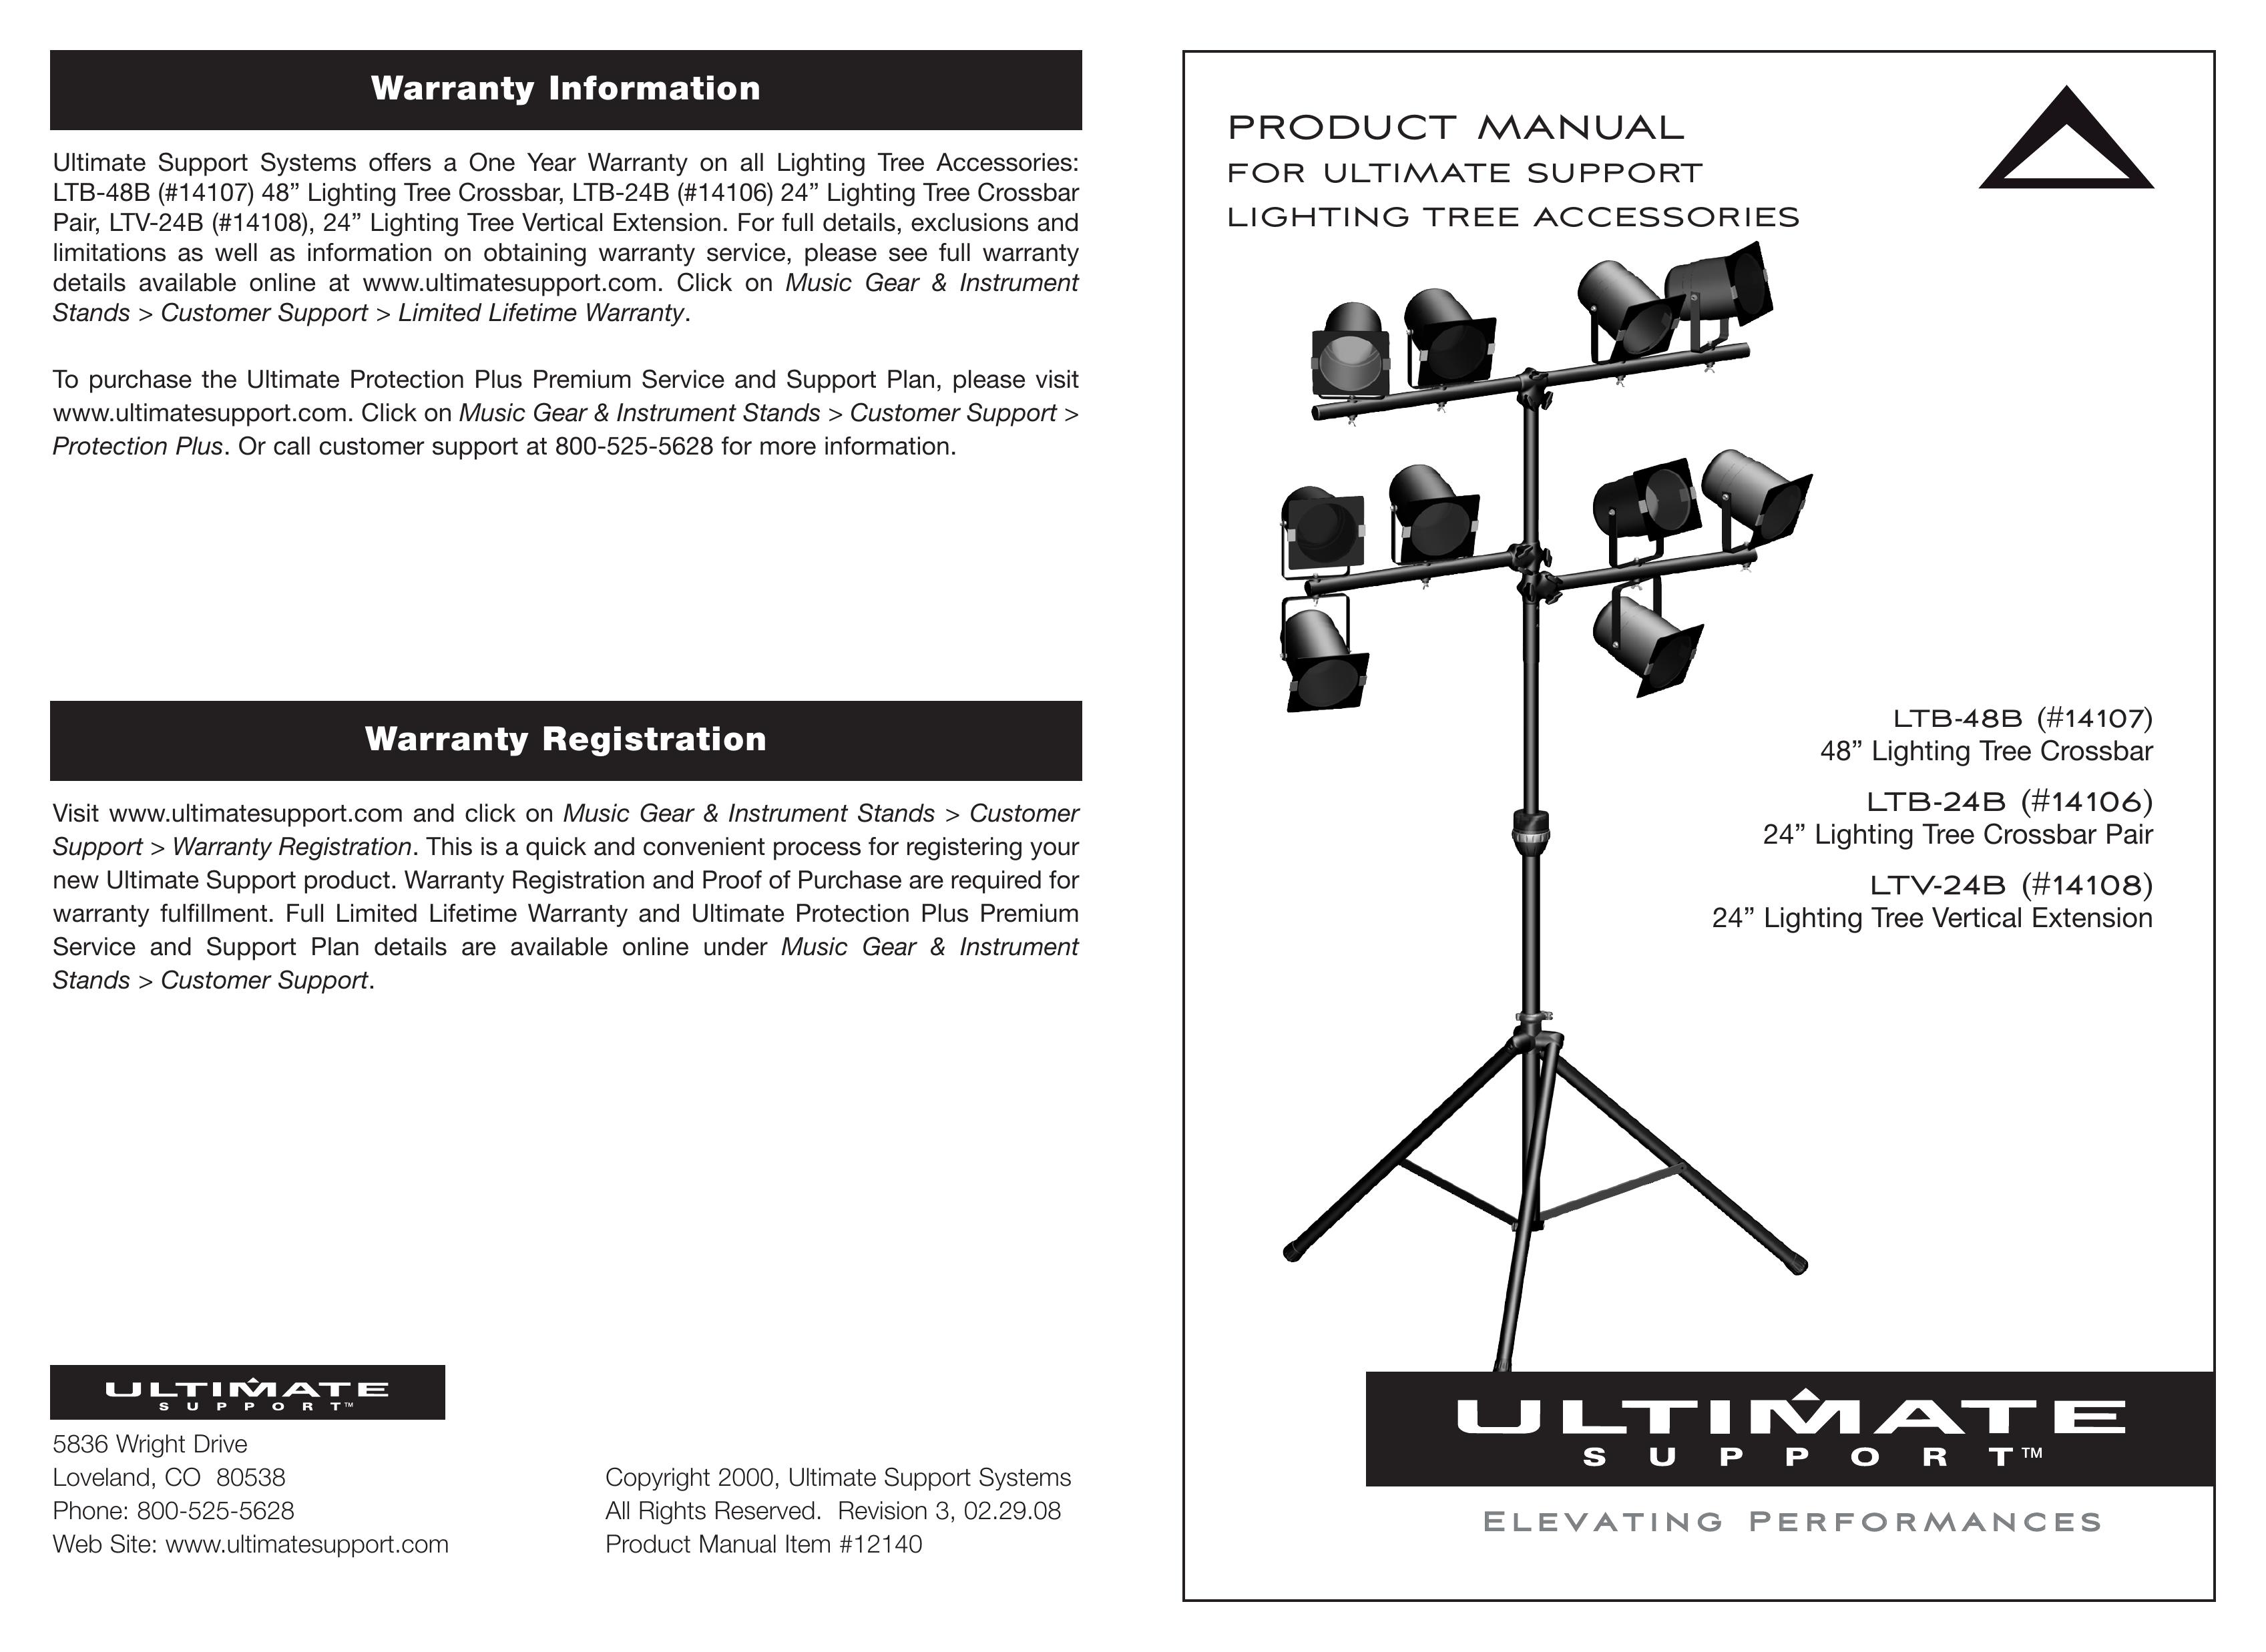 Ultimate Support Systems 14106 Marine Lighting User Manual